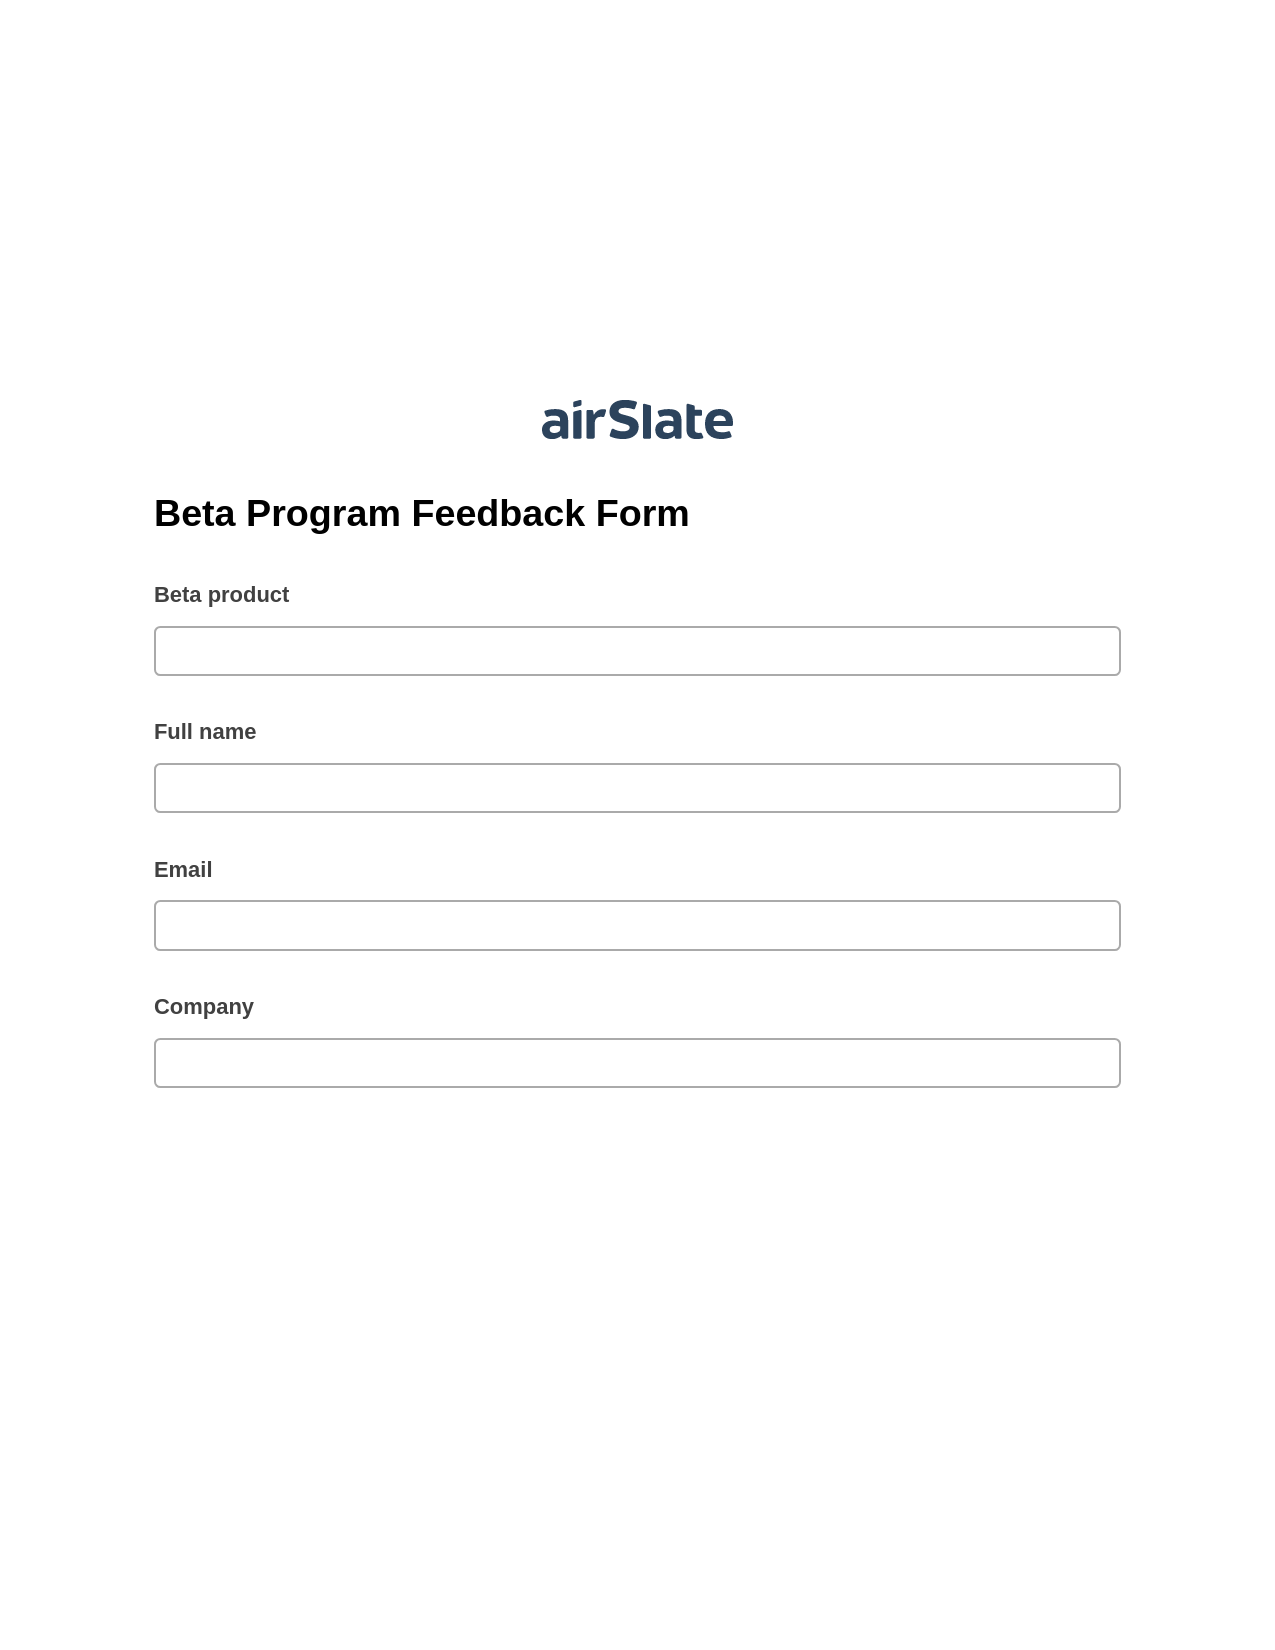 Multirole Beta Program Feedback Form Pre-fill from CSV File Bot, Add Tags to Slate Bot, Export to Excel 365 Bot